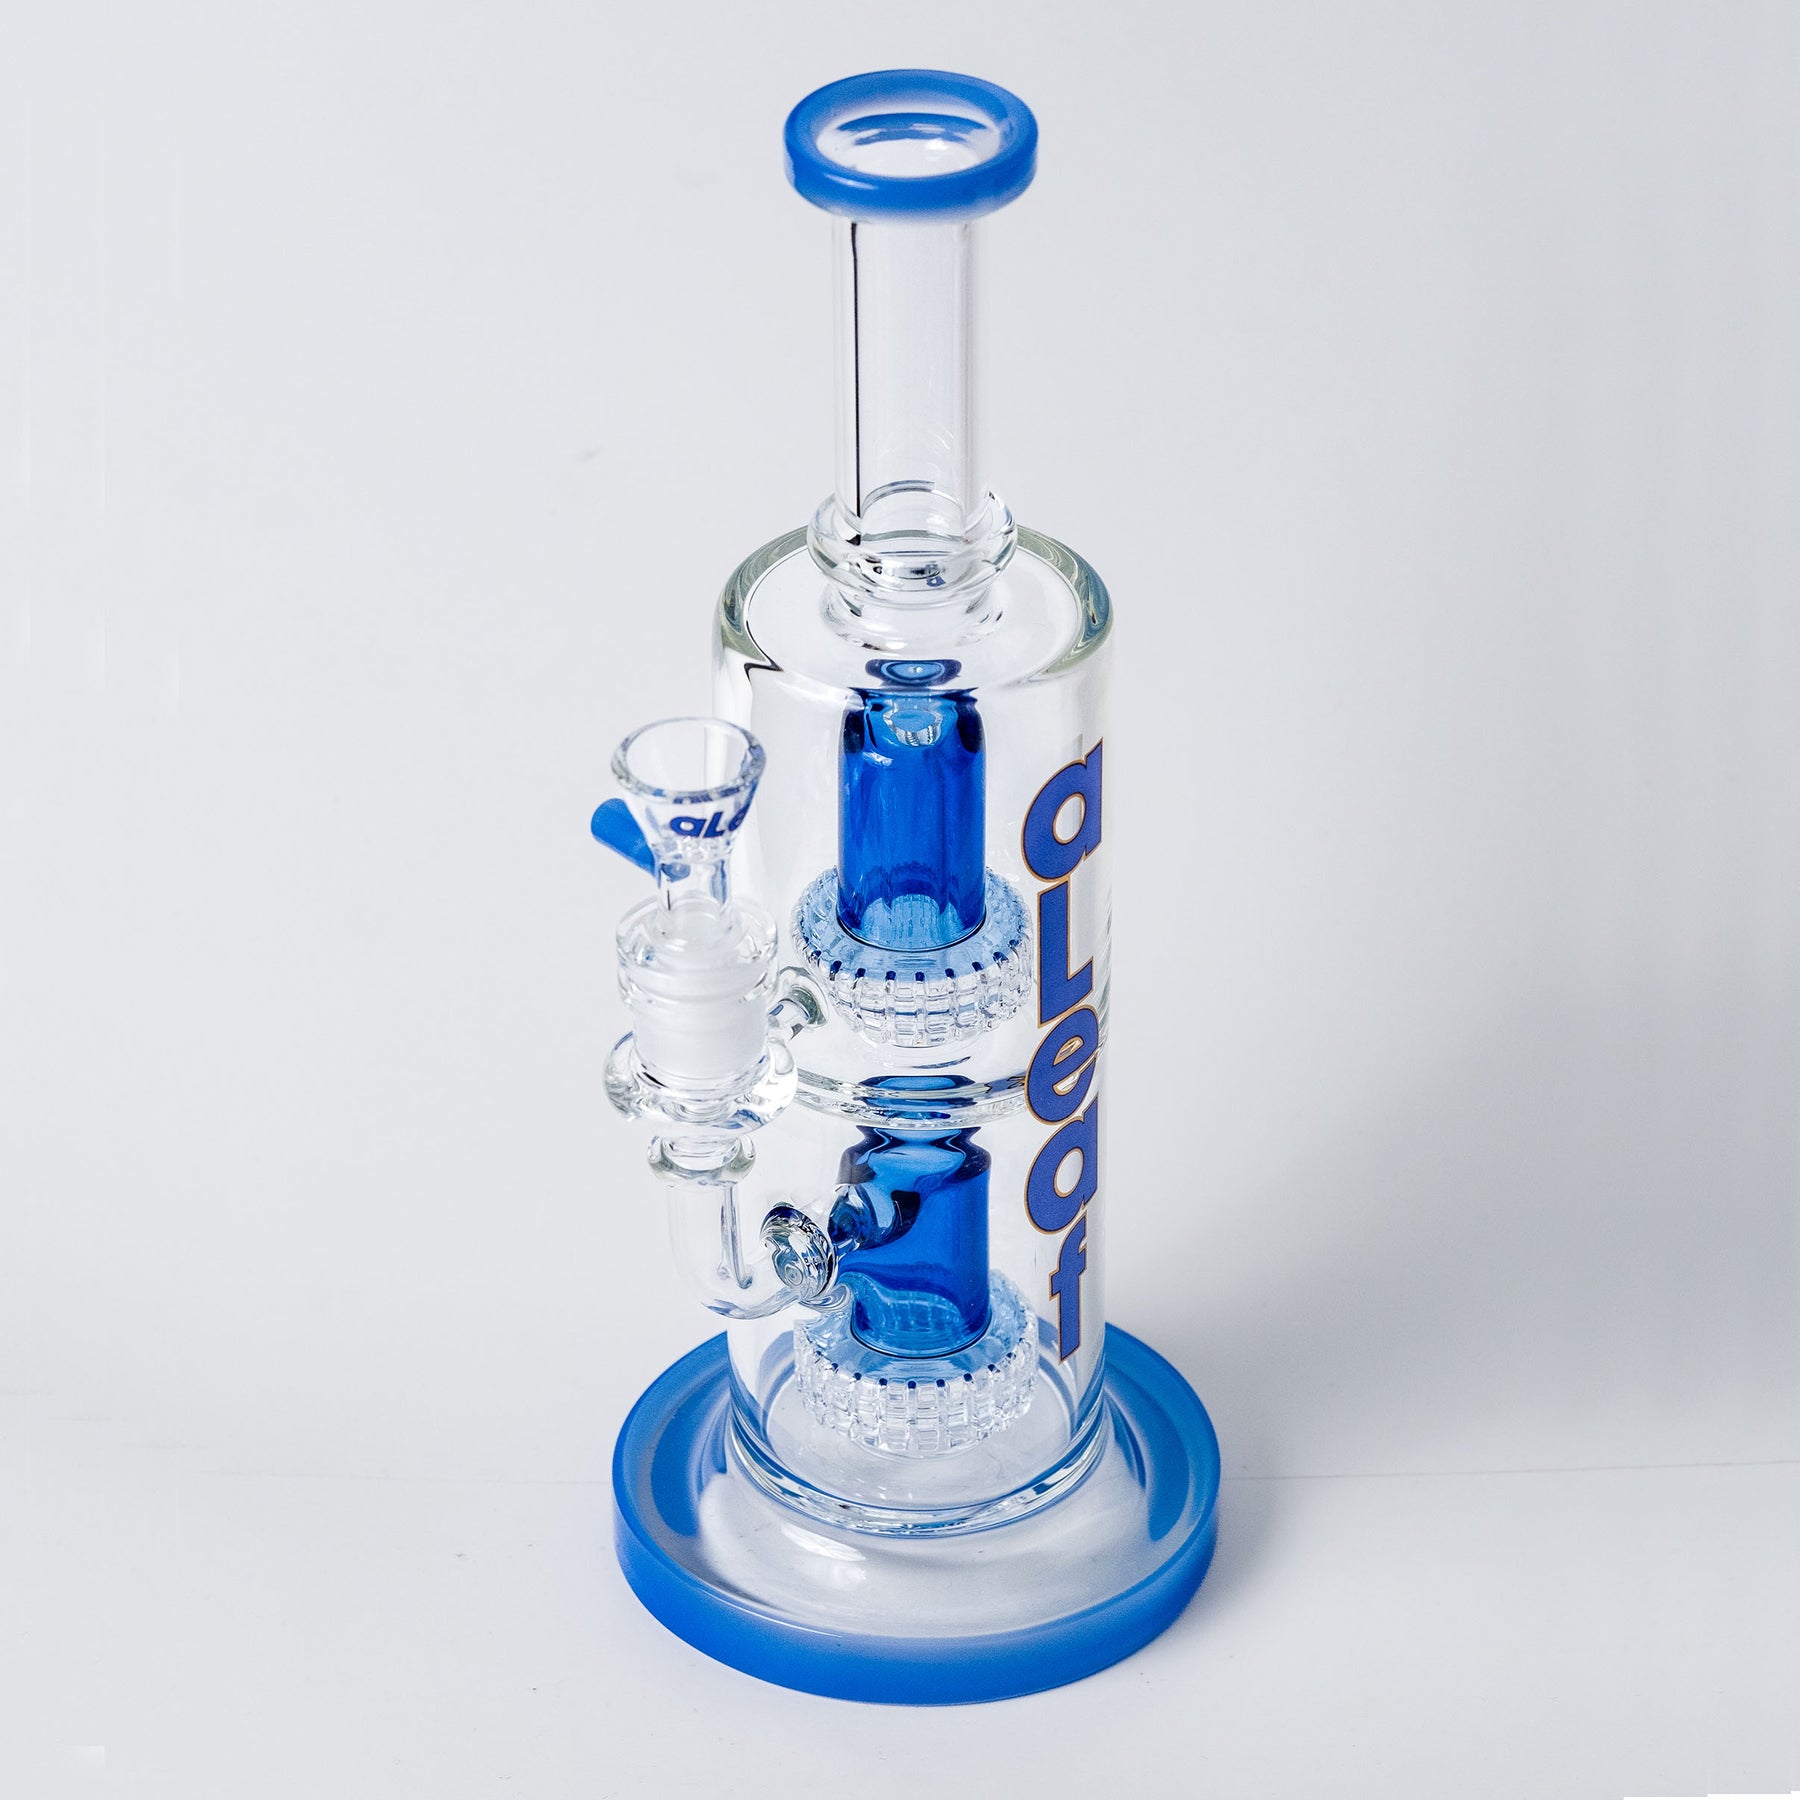 Top View of Blue Double Perc Bong